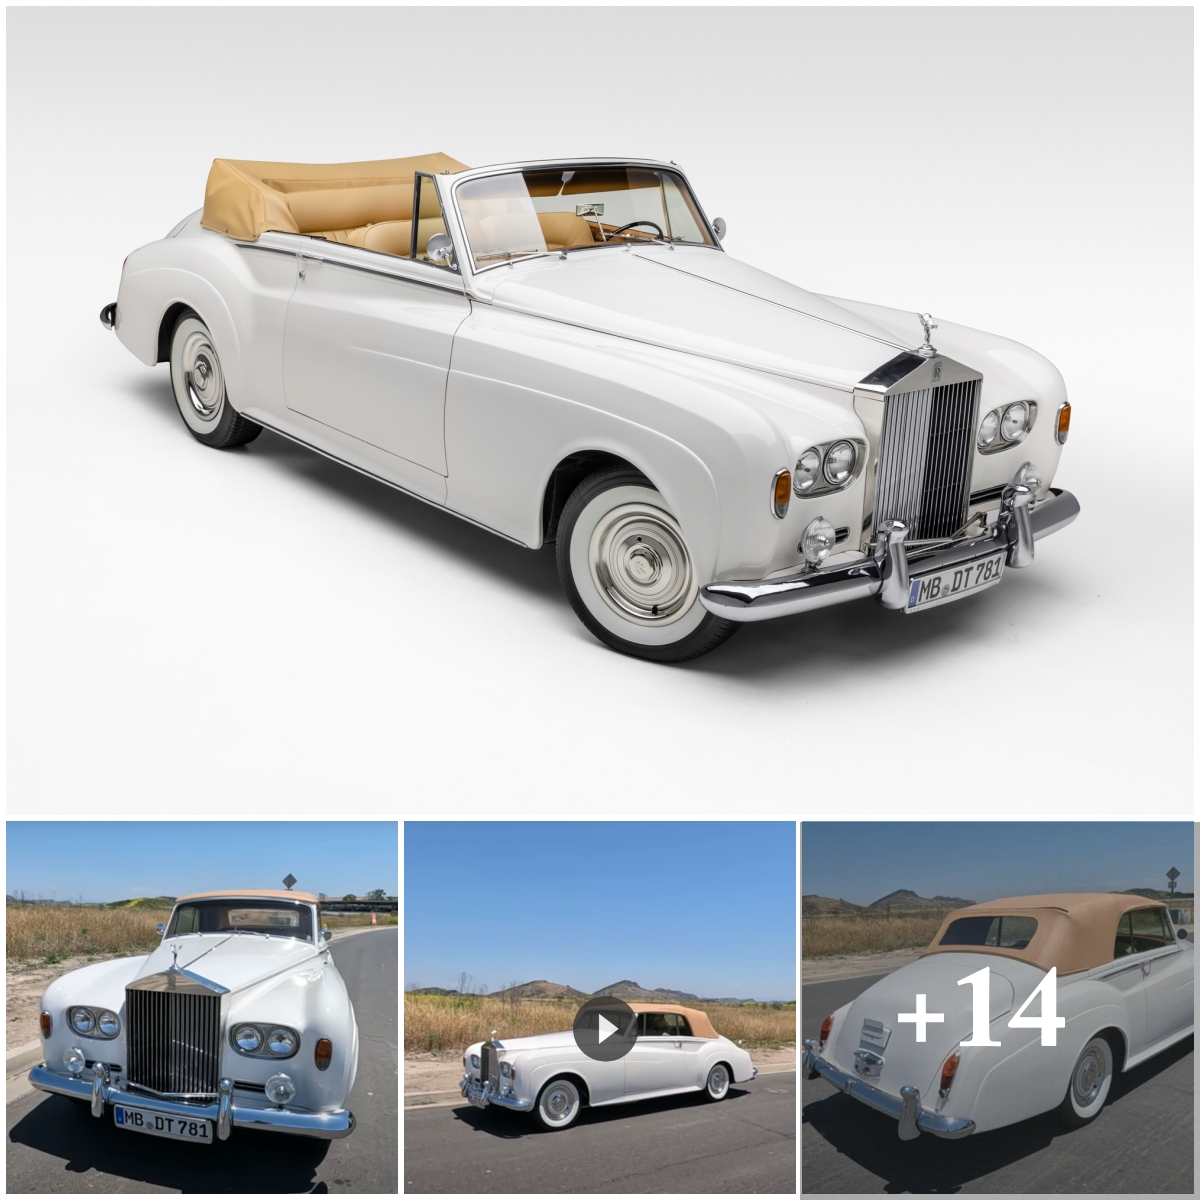 The 1963 Rolls-Royce Silver Cloud III Drophead Coupe-Style Conversion